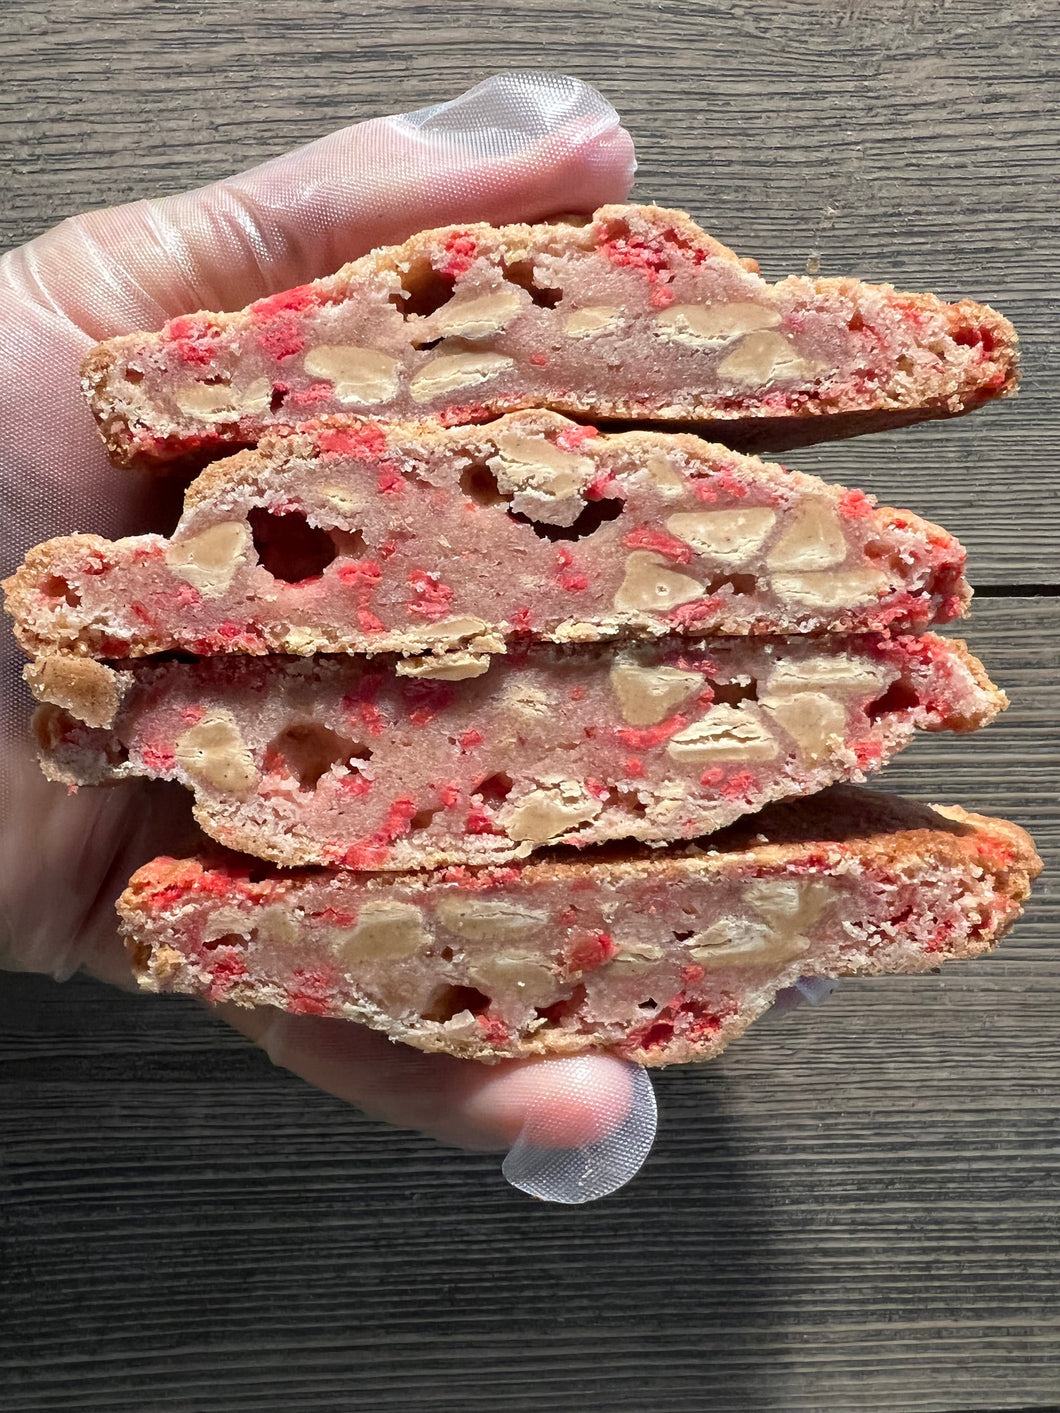 Strawberry Peanut Butter Jelly Time! (12 Half Pack)